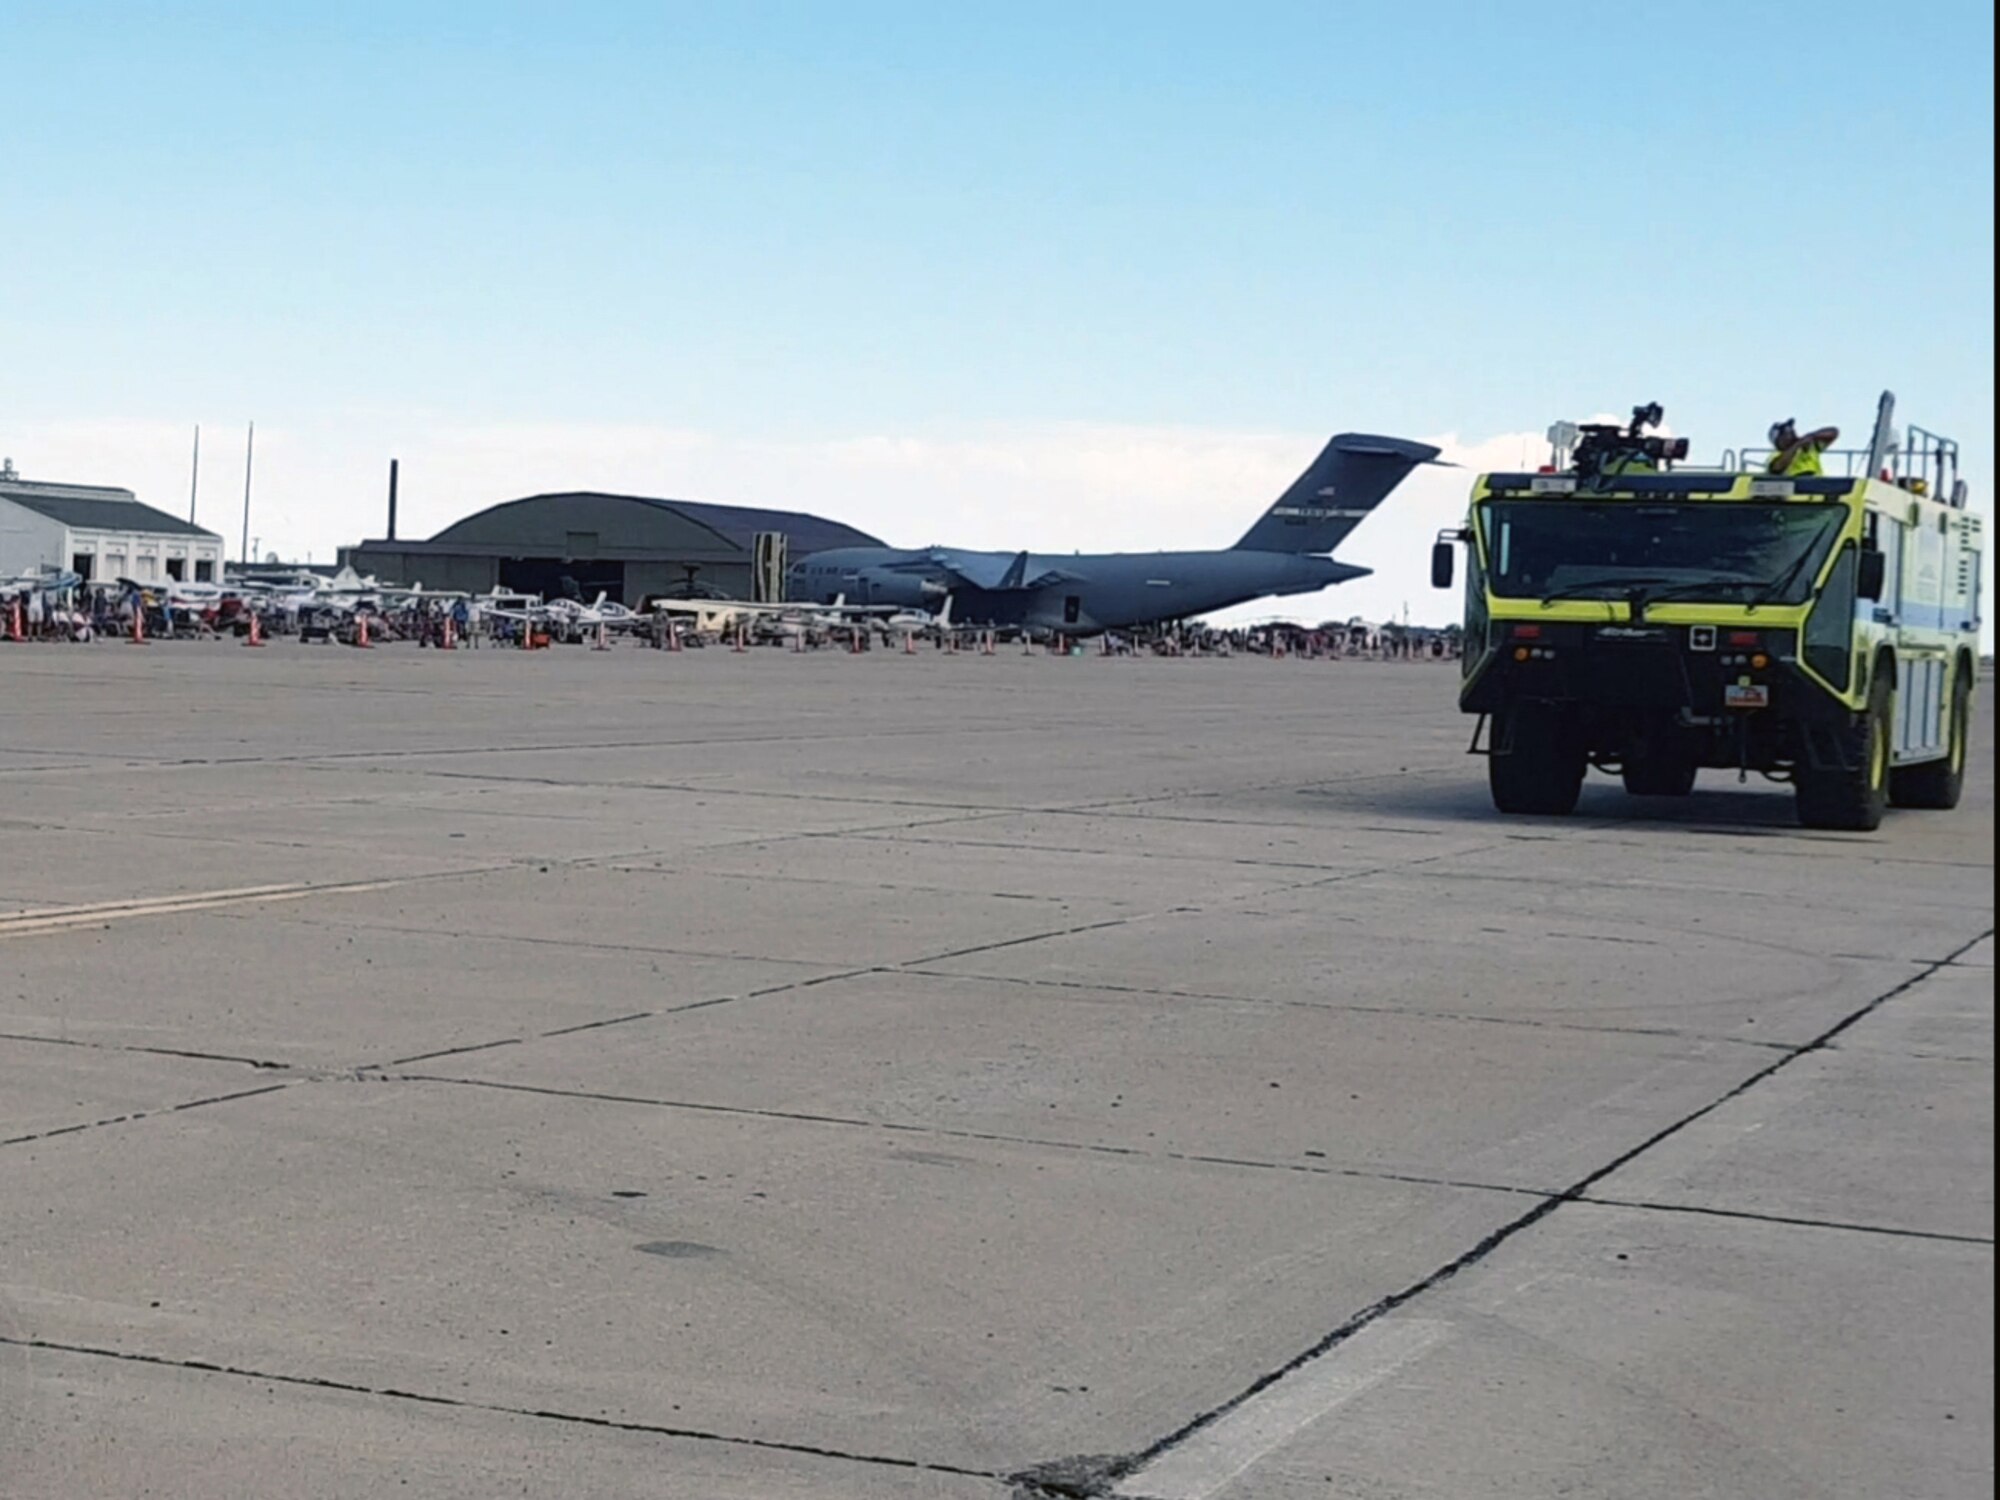 A fire truck sits on the flight line with a C-17 in the background